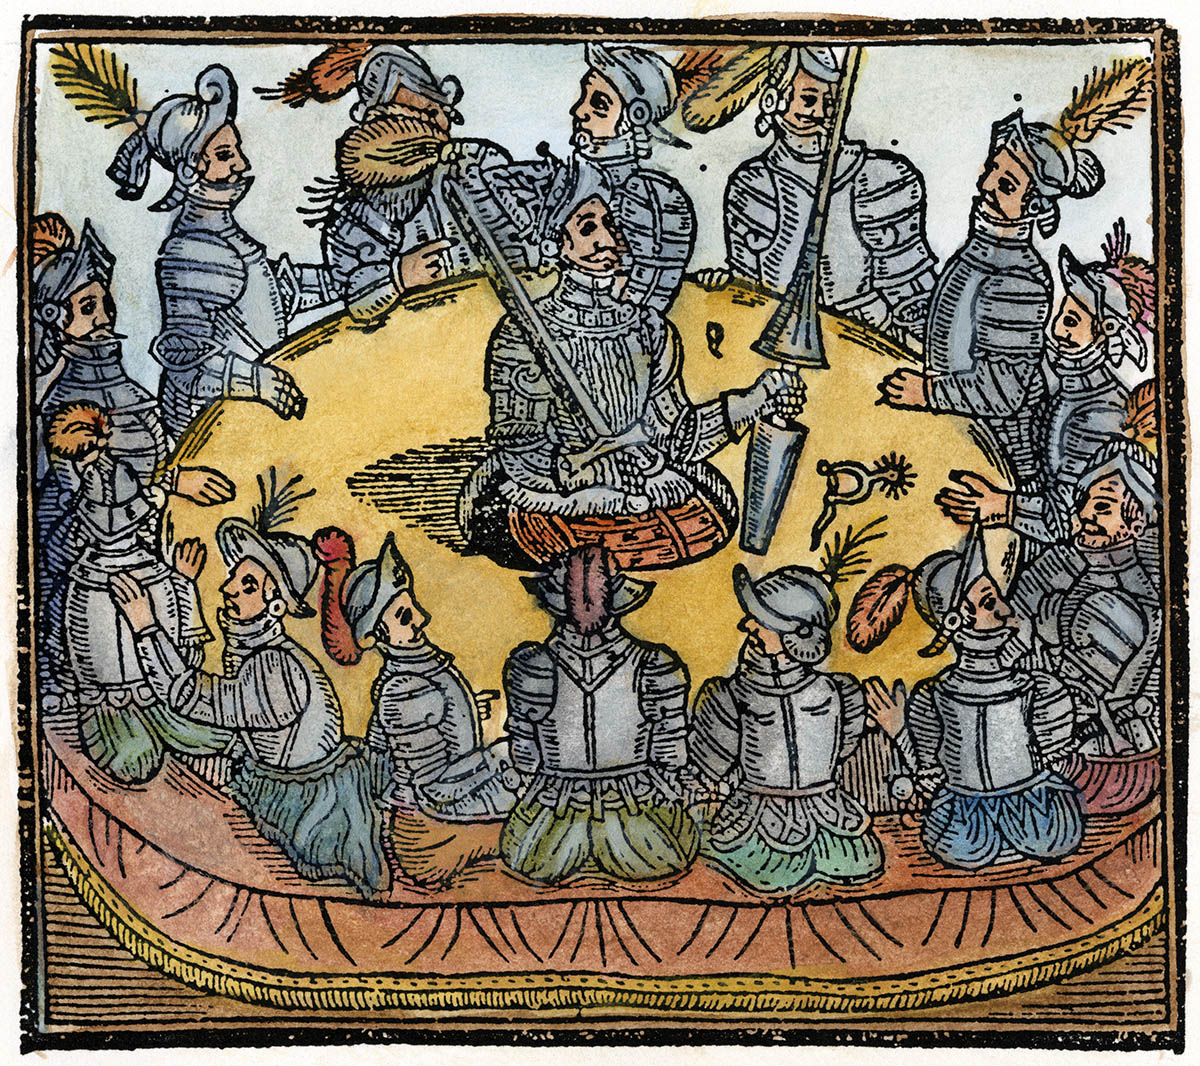 King Arthur and the Knights of the Round Table. Frontispiece from 